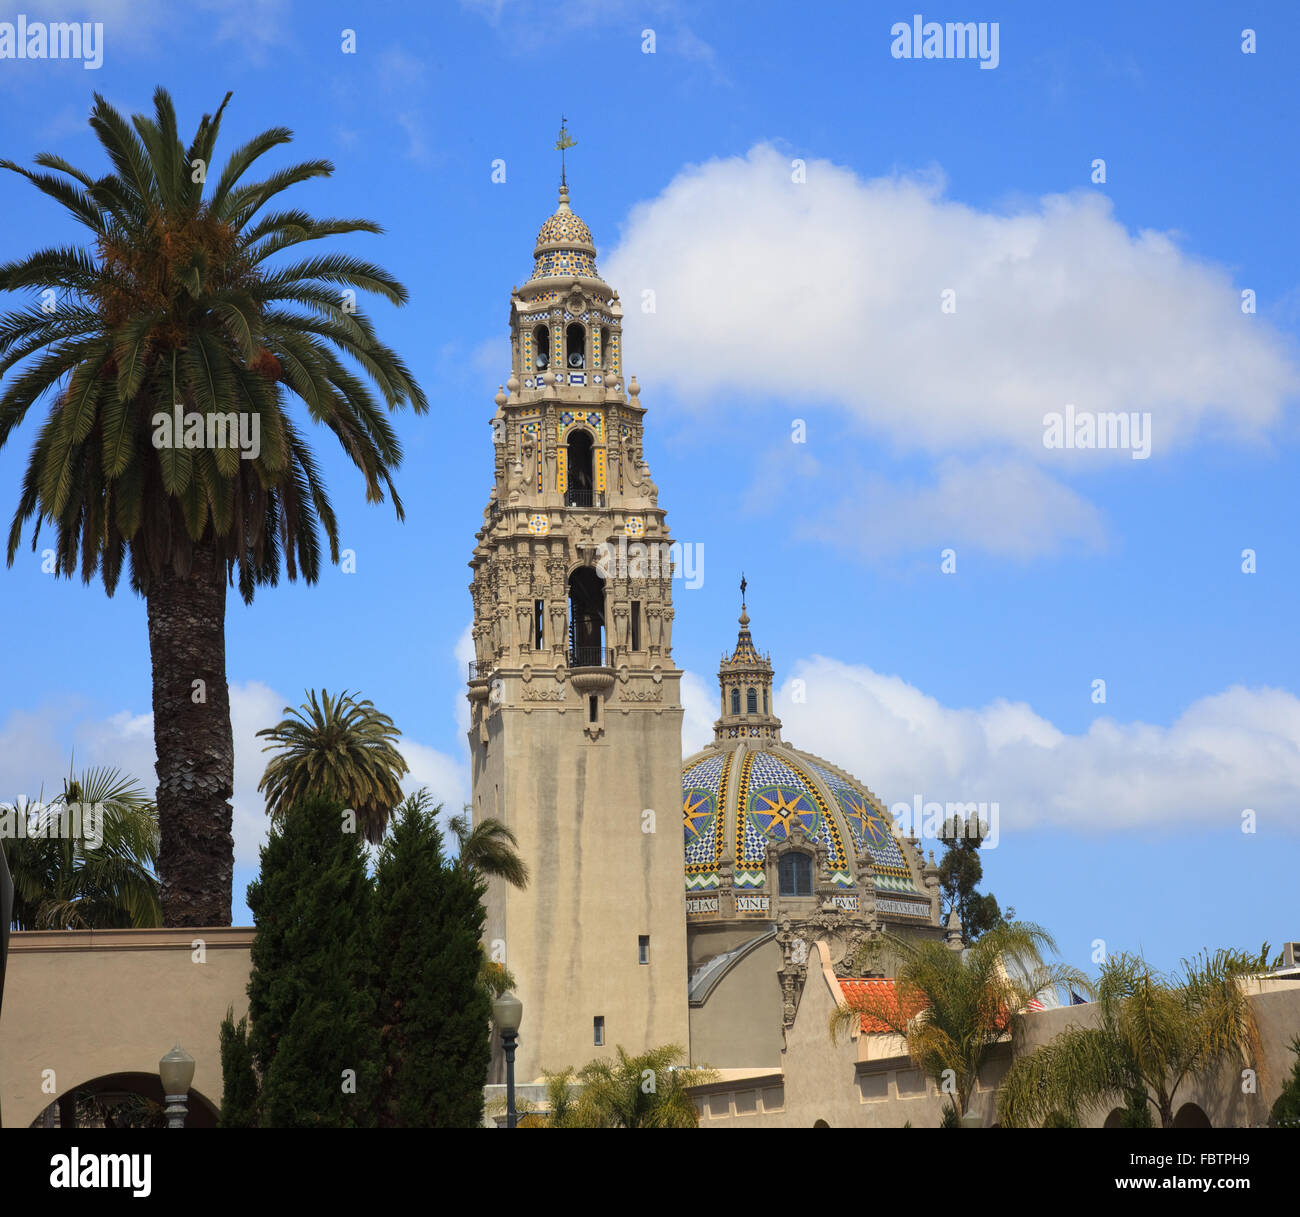 View of the ornate California Tower from the Alcazar Gardens in Balboa Park in San Diego with ornate dome Stock Photo